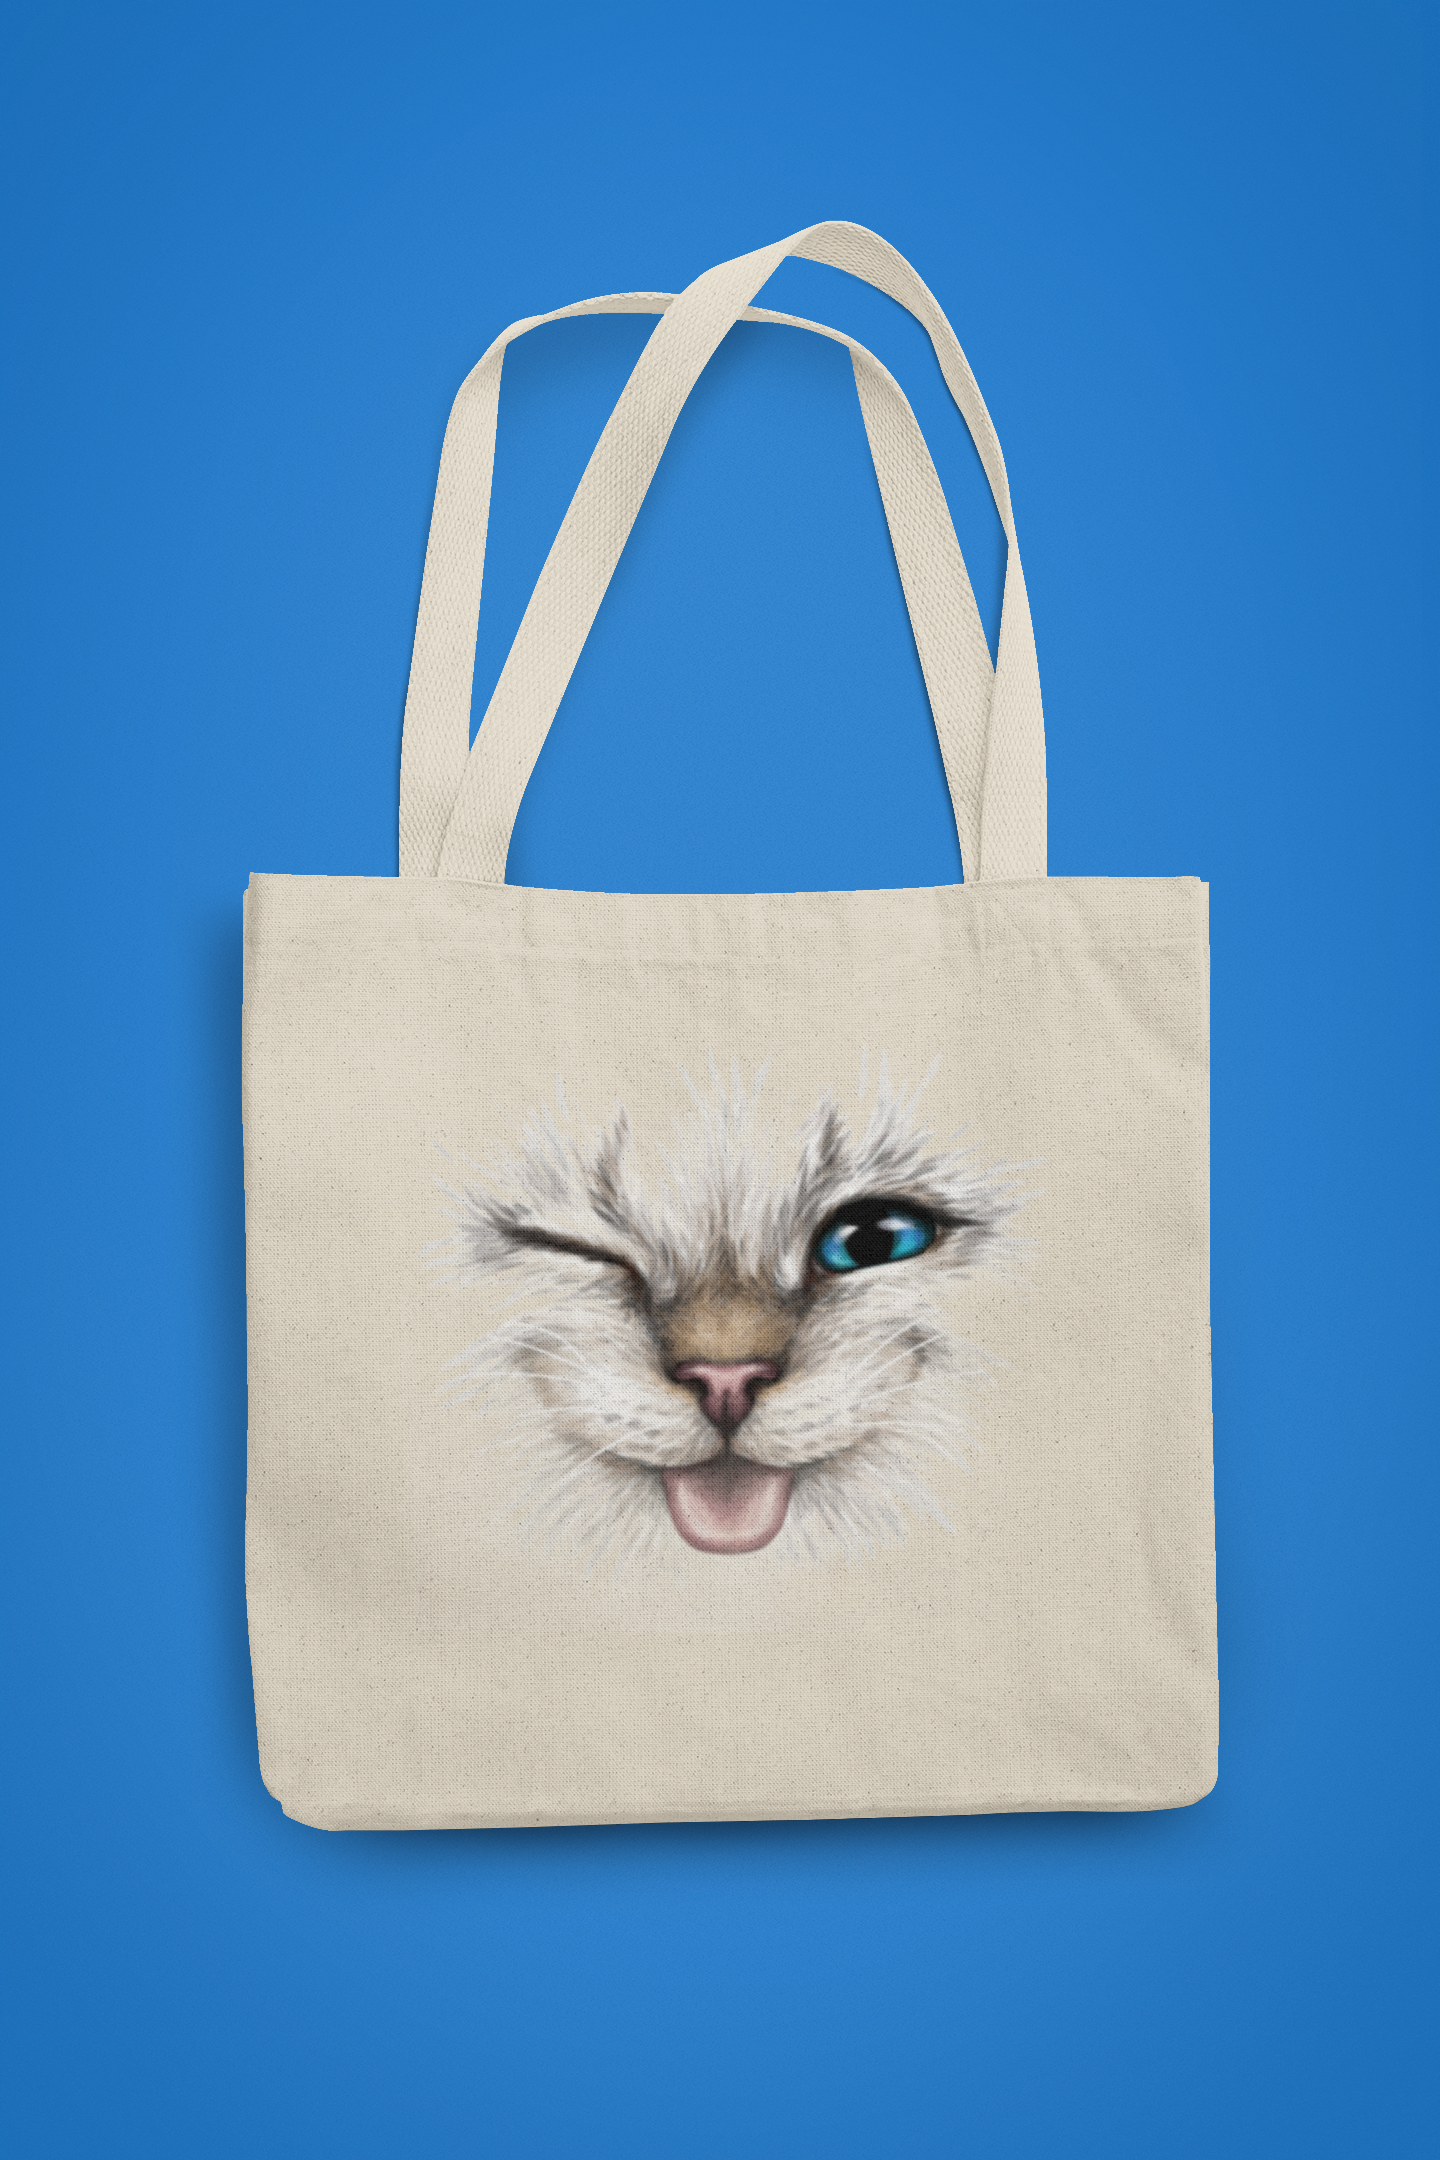 Purrfect - Tote